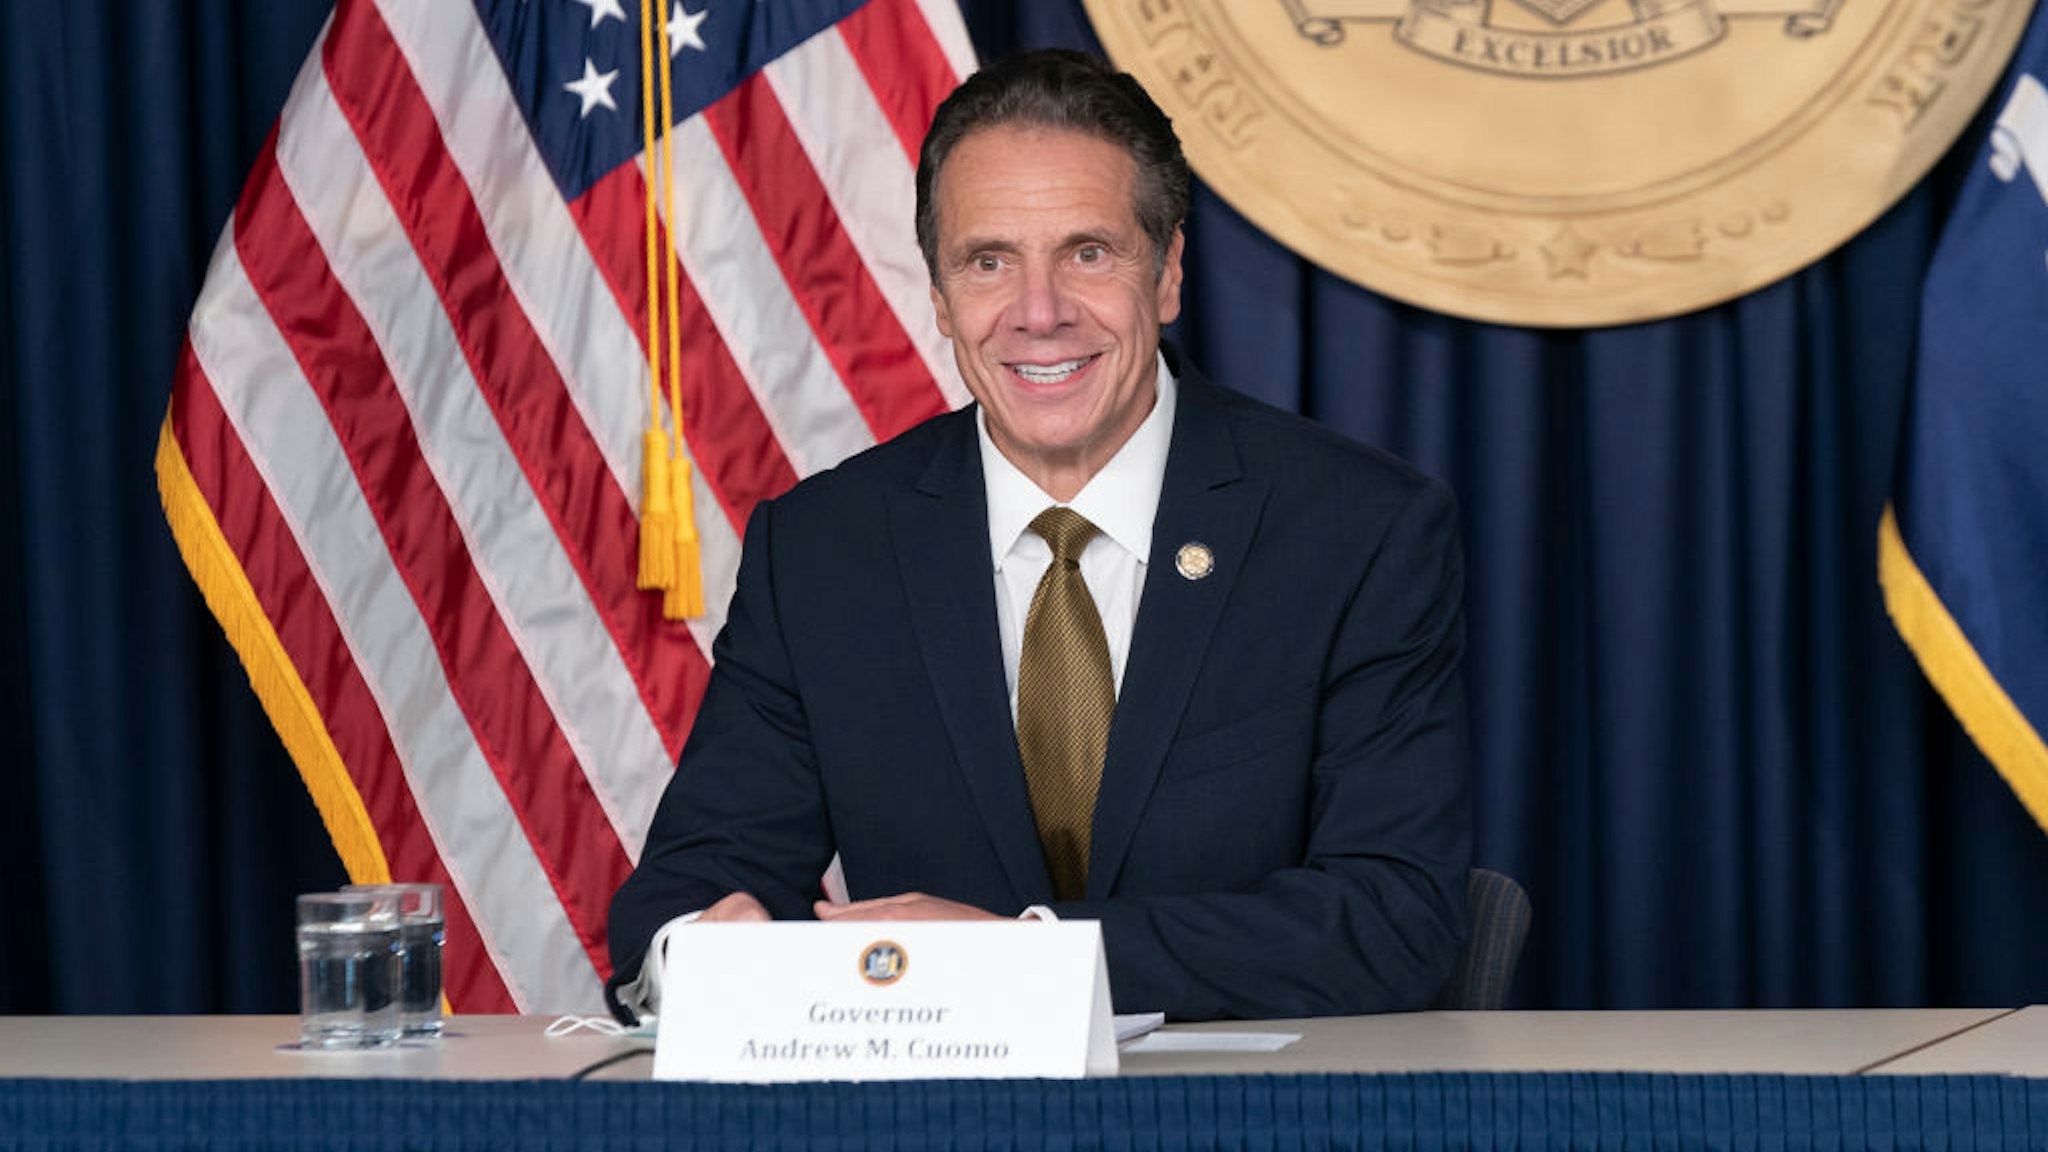 New York State Governor Andrew Cuomo makes daily media announcement and briefing at 633 3rd Avenue, Manhattan.